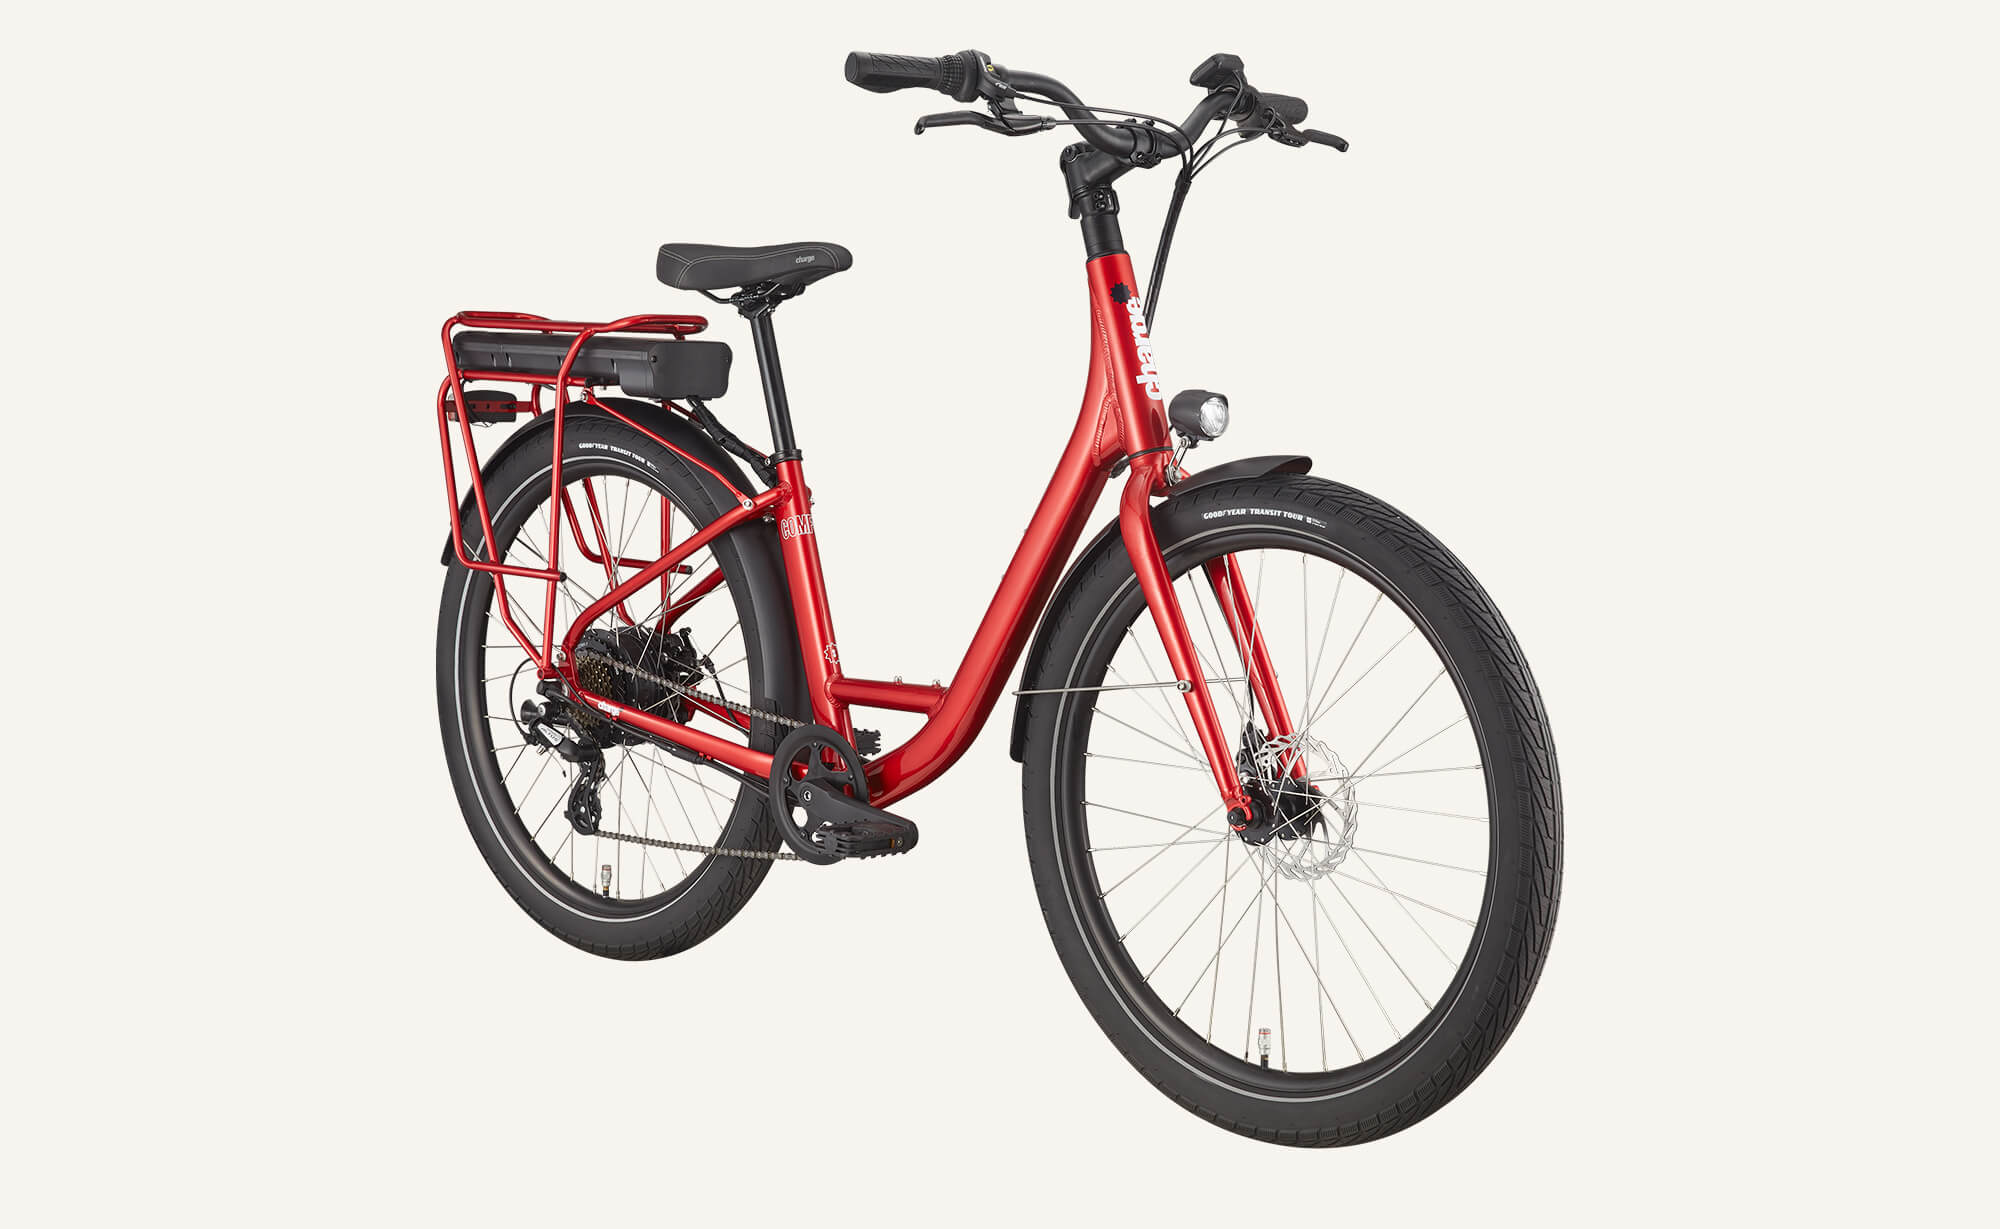 The Best Trail and Commuter E-Bikes Charge Electric Bikes